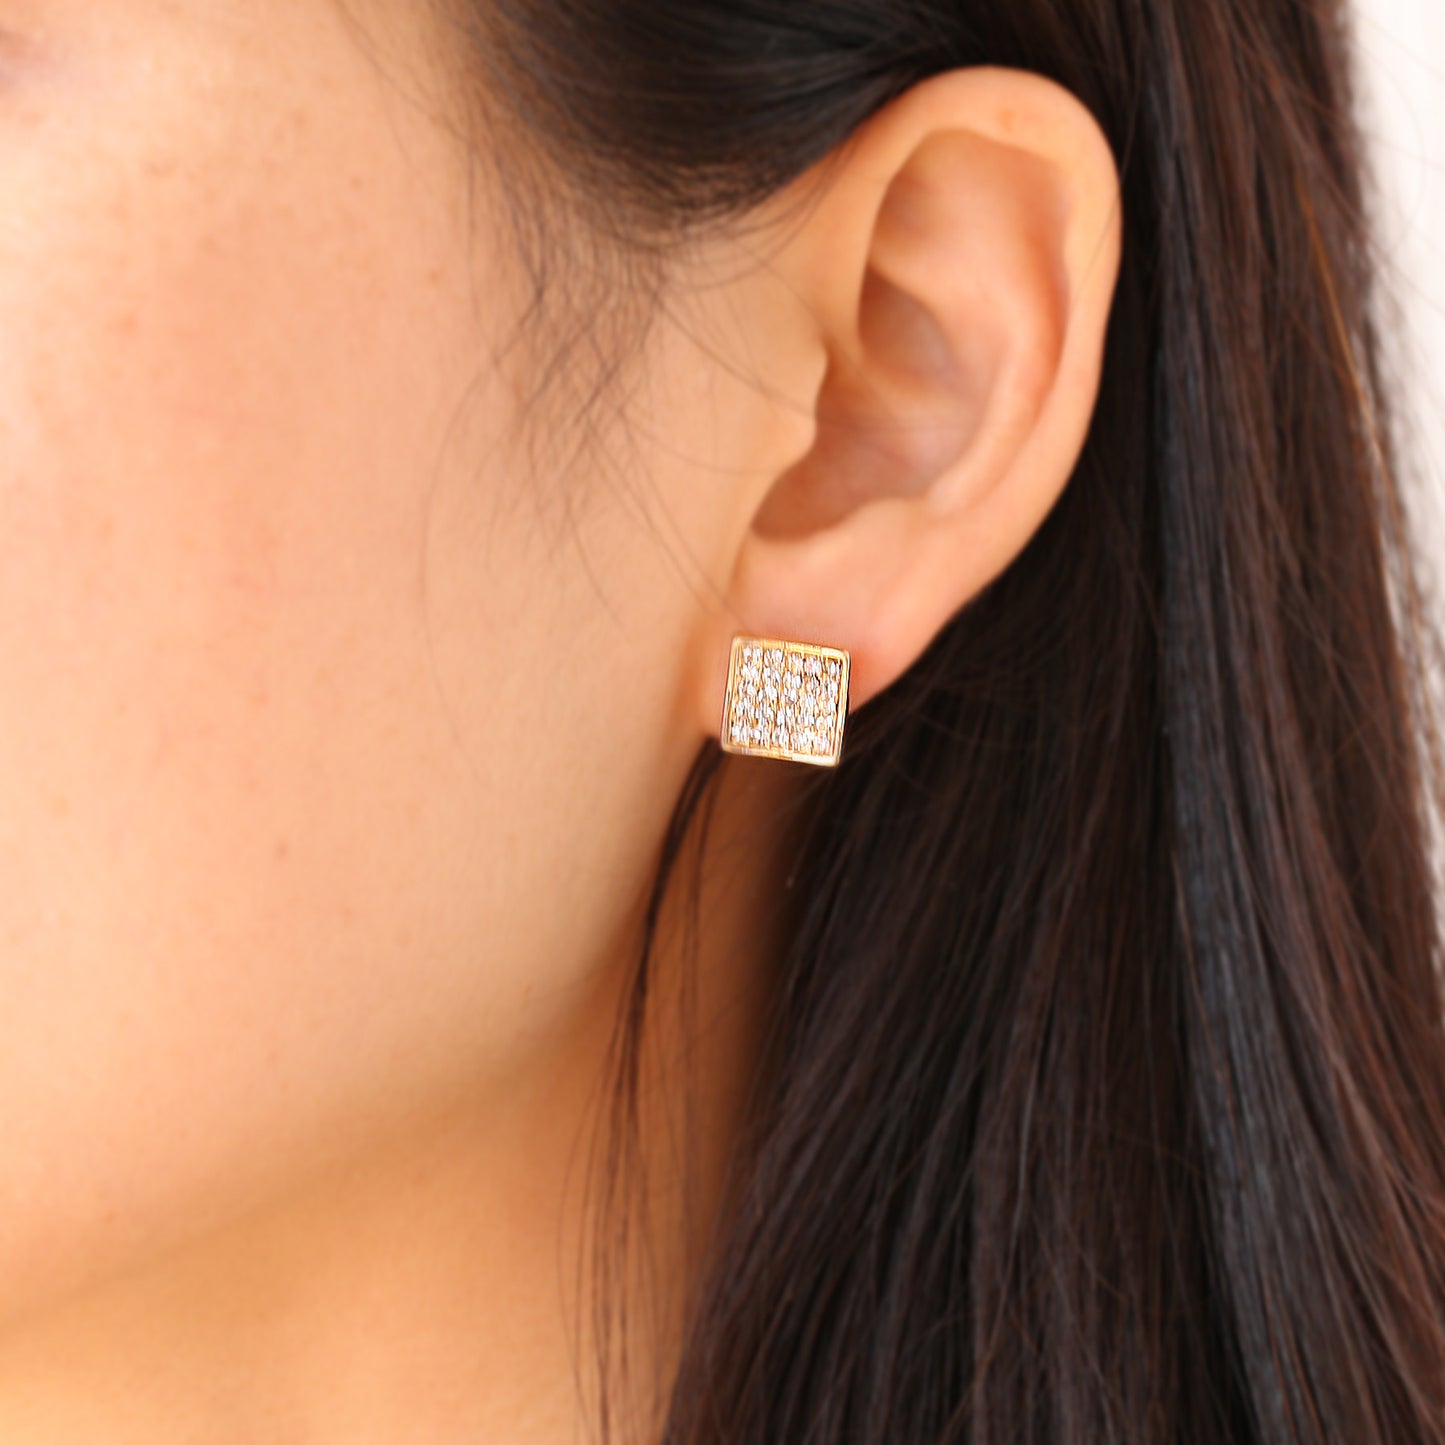 Pave CZ Square Earrings - 14K Gold Filled